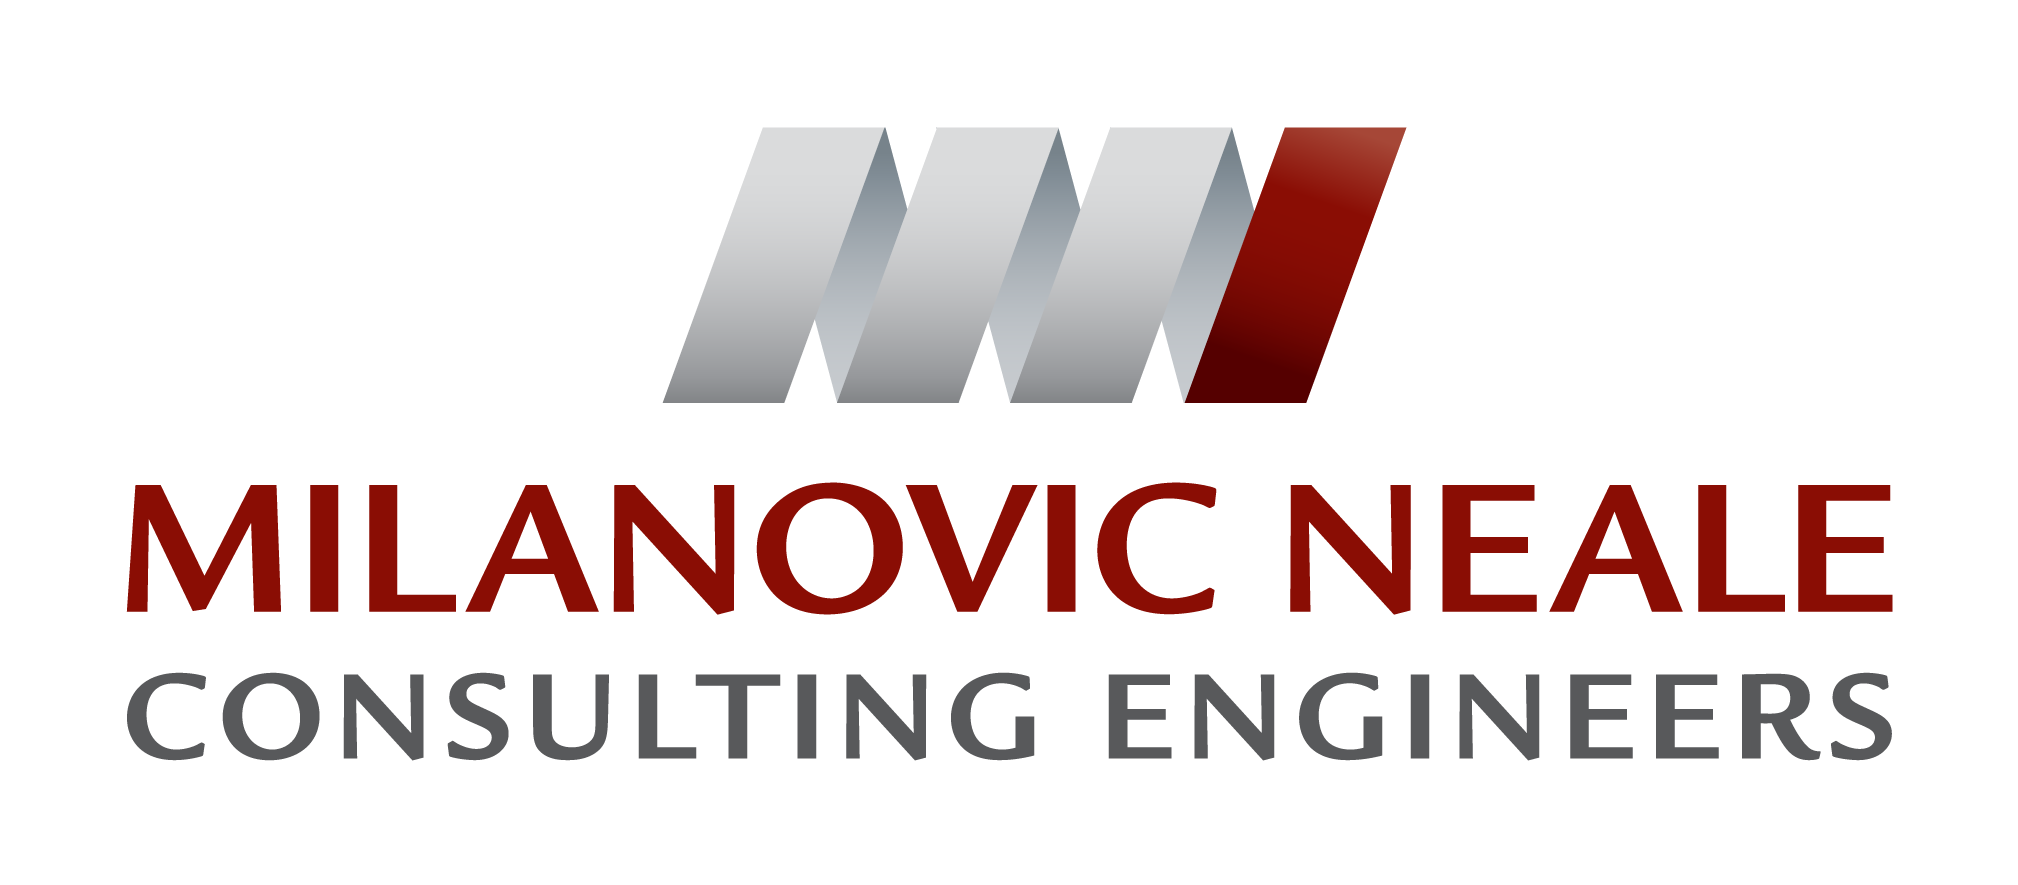 Milanovic Neale Consulting Engineers